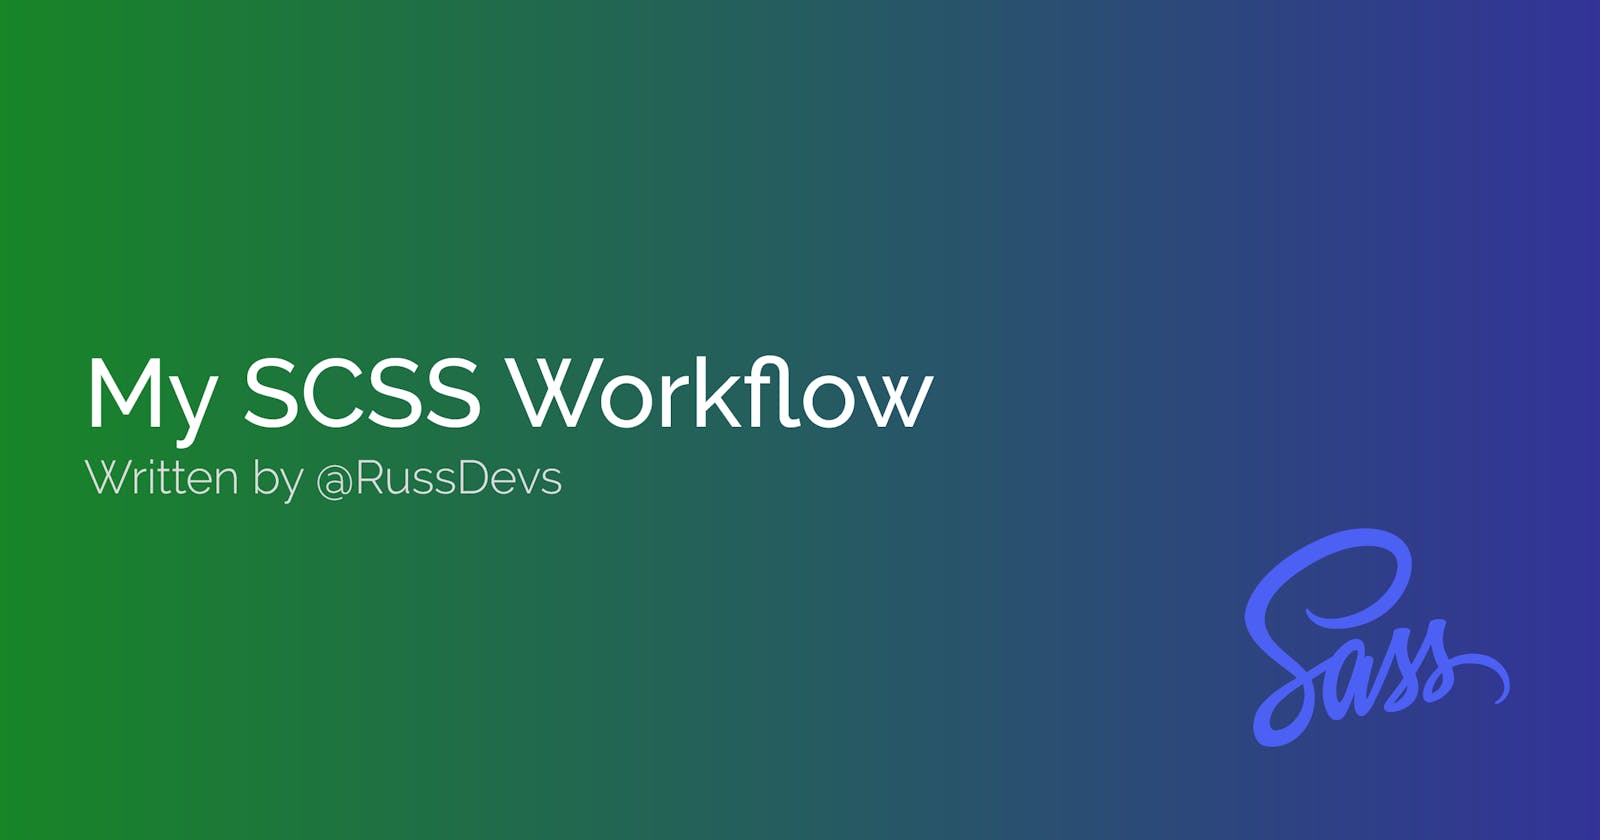 My SCSS Workflow